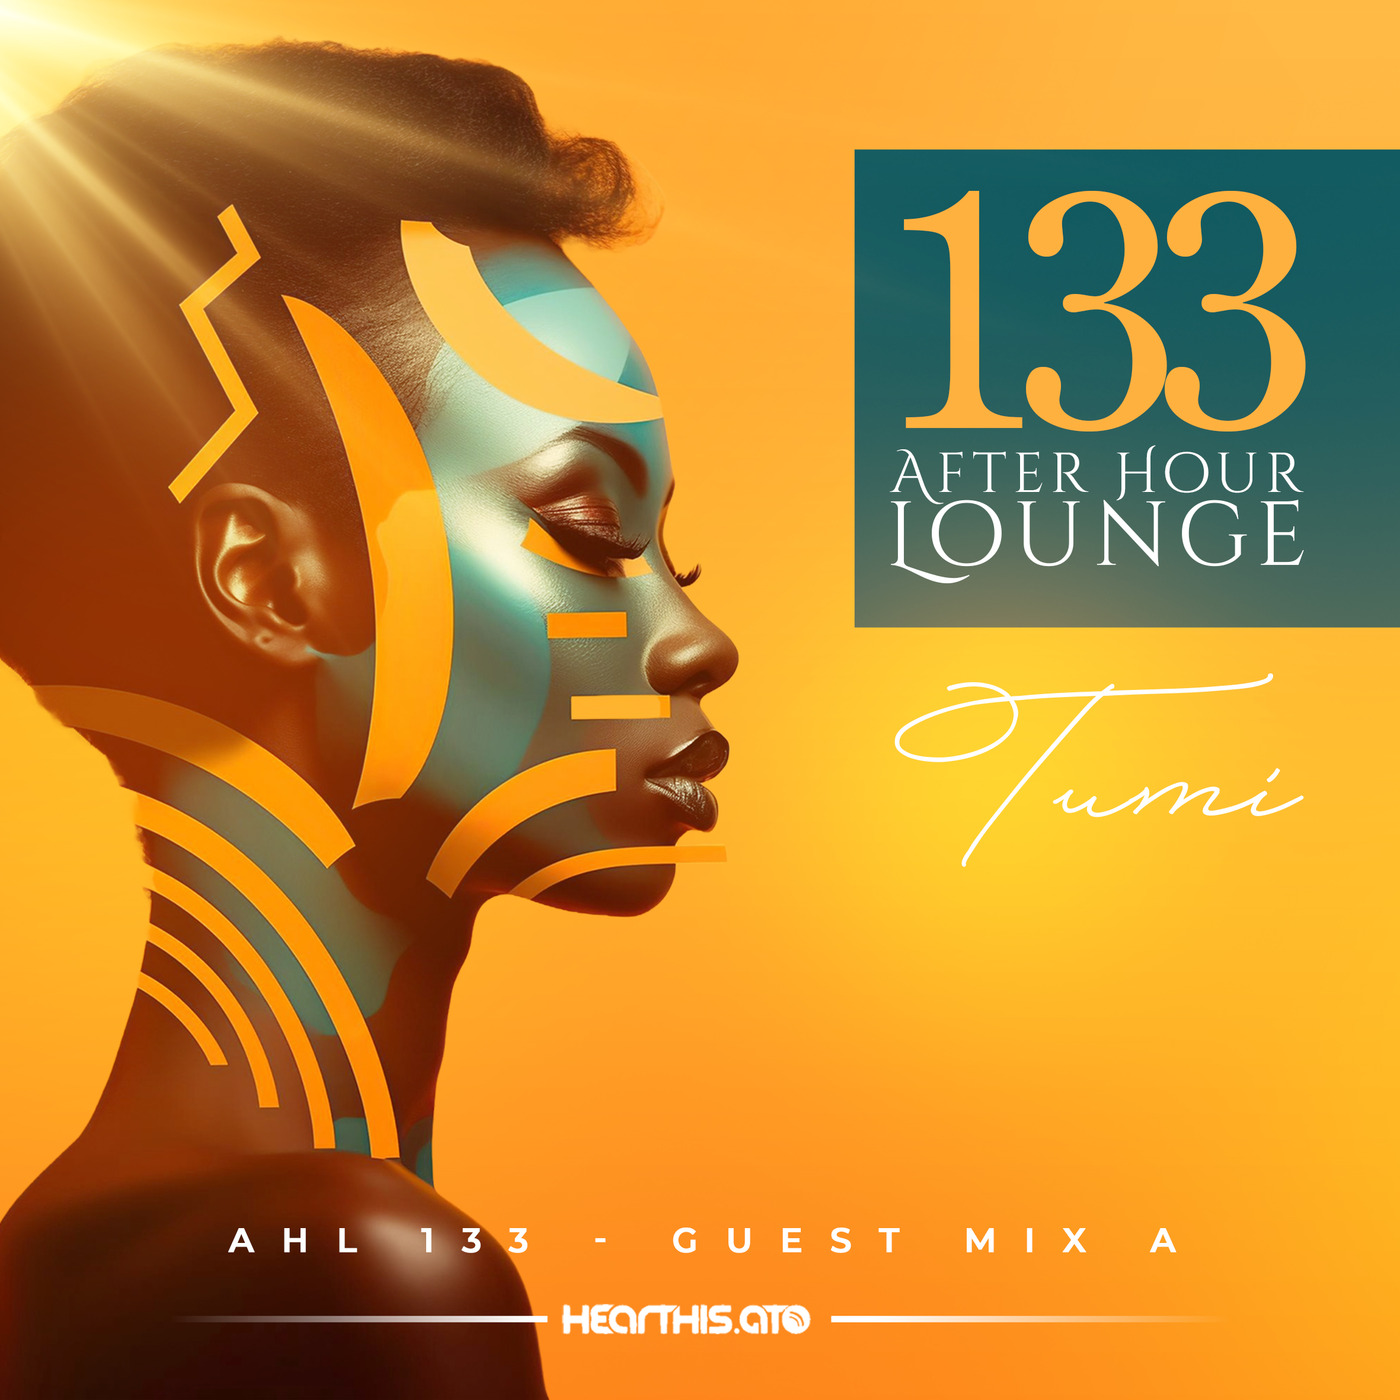 After Hour Lounge 133 (Guest Mix - A) mixed by Tumi